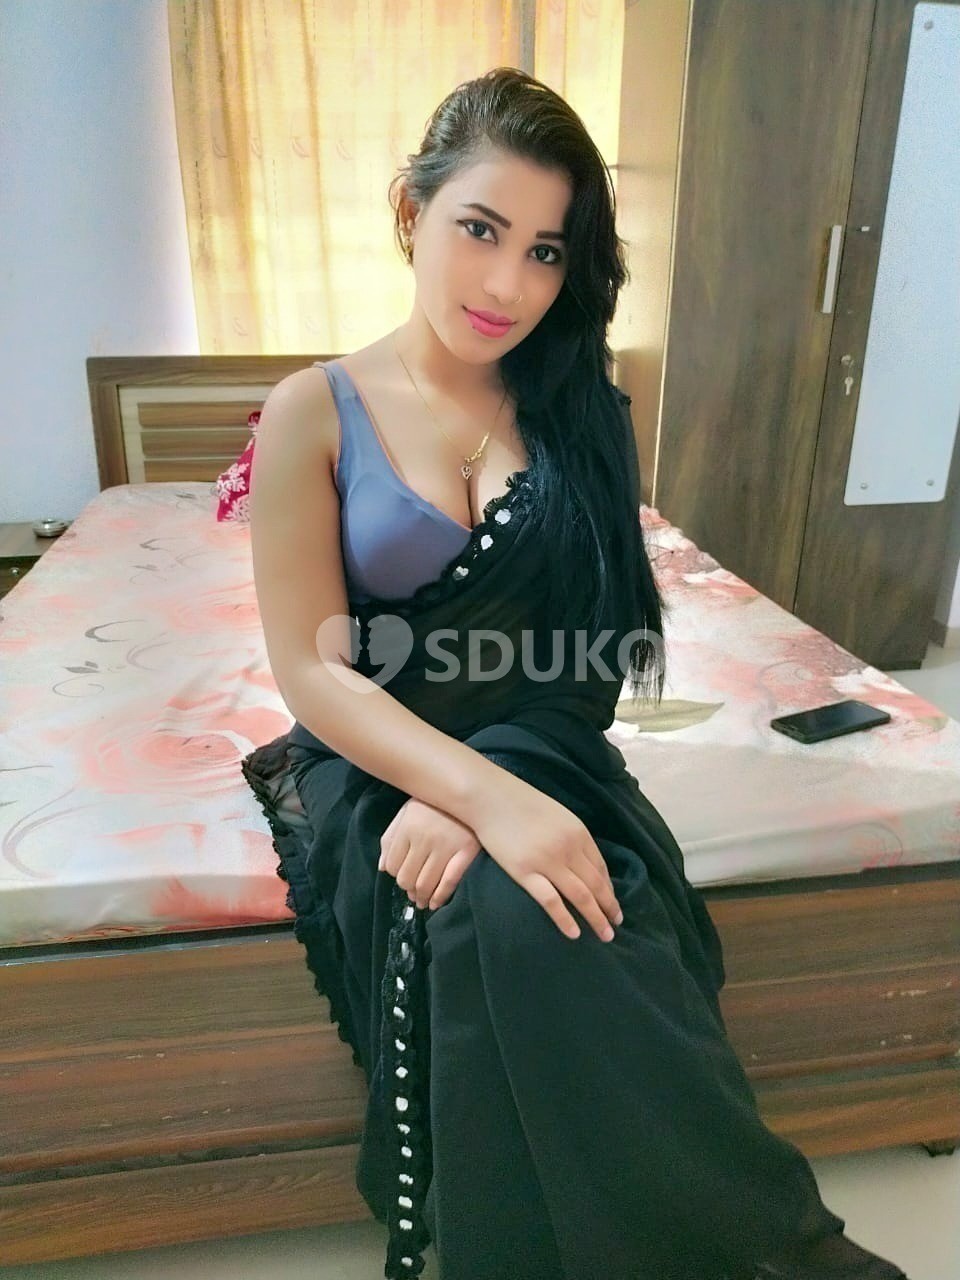 Bangalore   24x7 Nisha call girl serviceAFFORDABLE CHEAPEST RATE SAFE CALL GIRL SERVICE